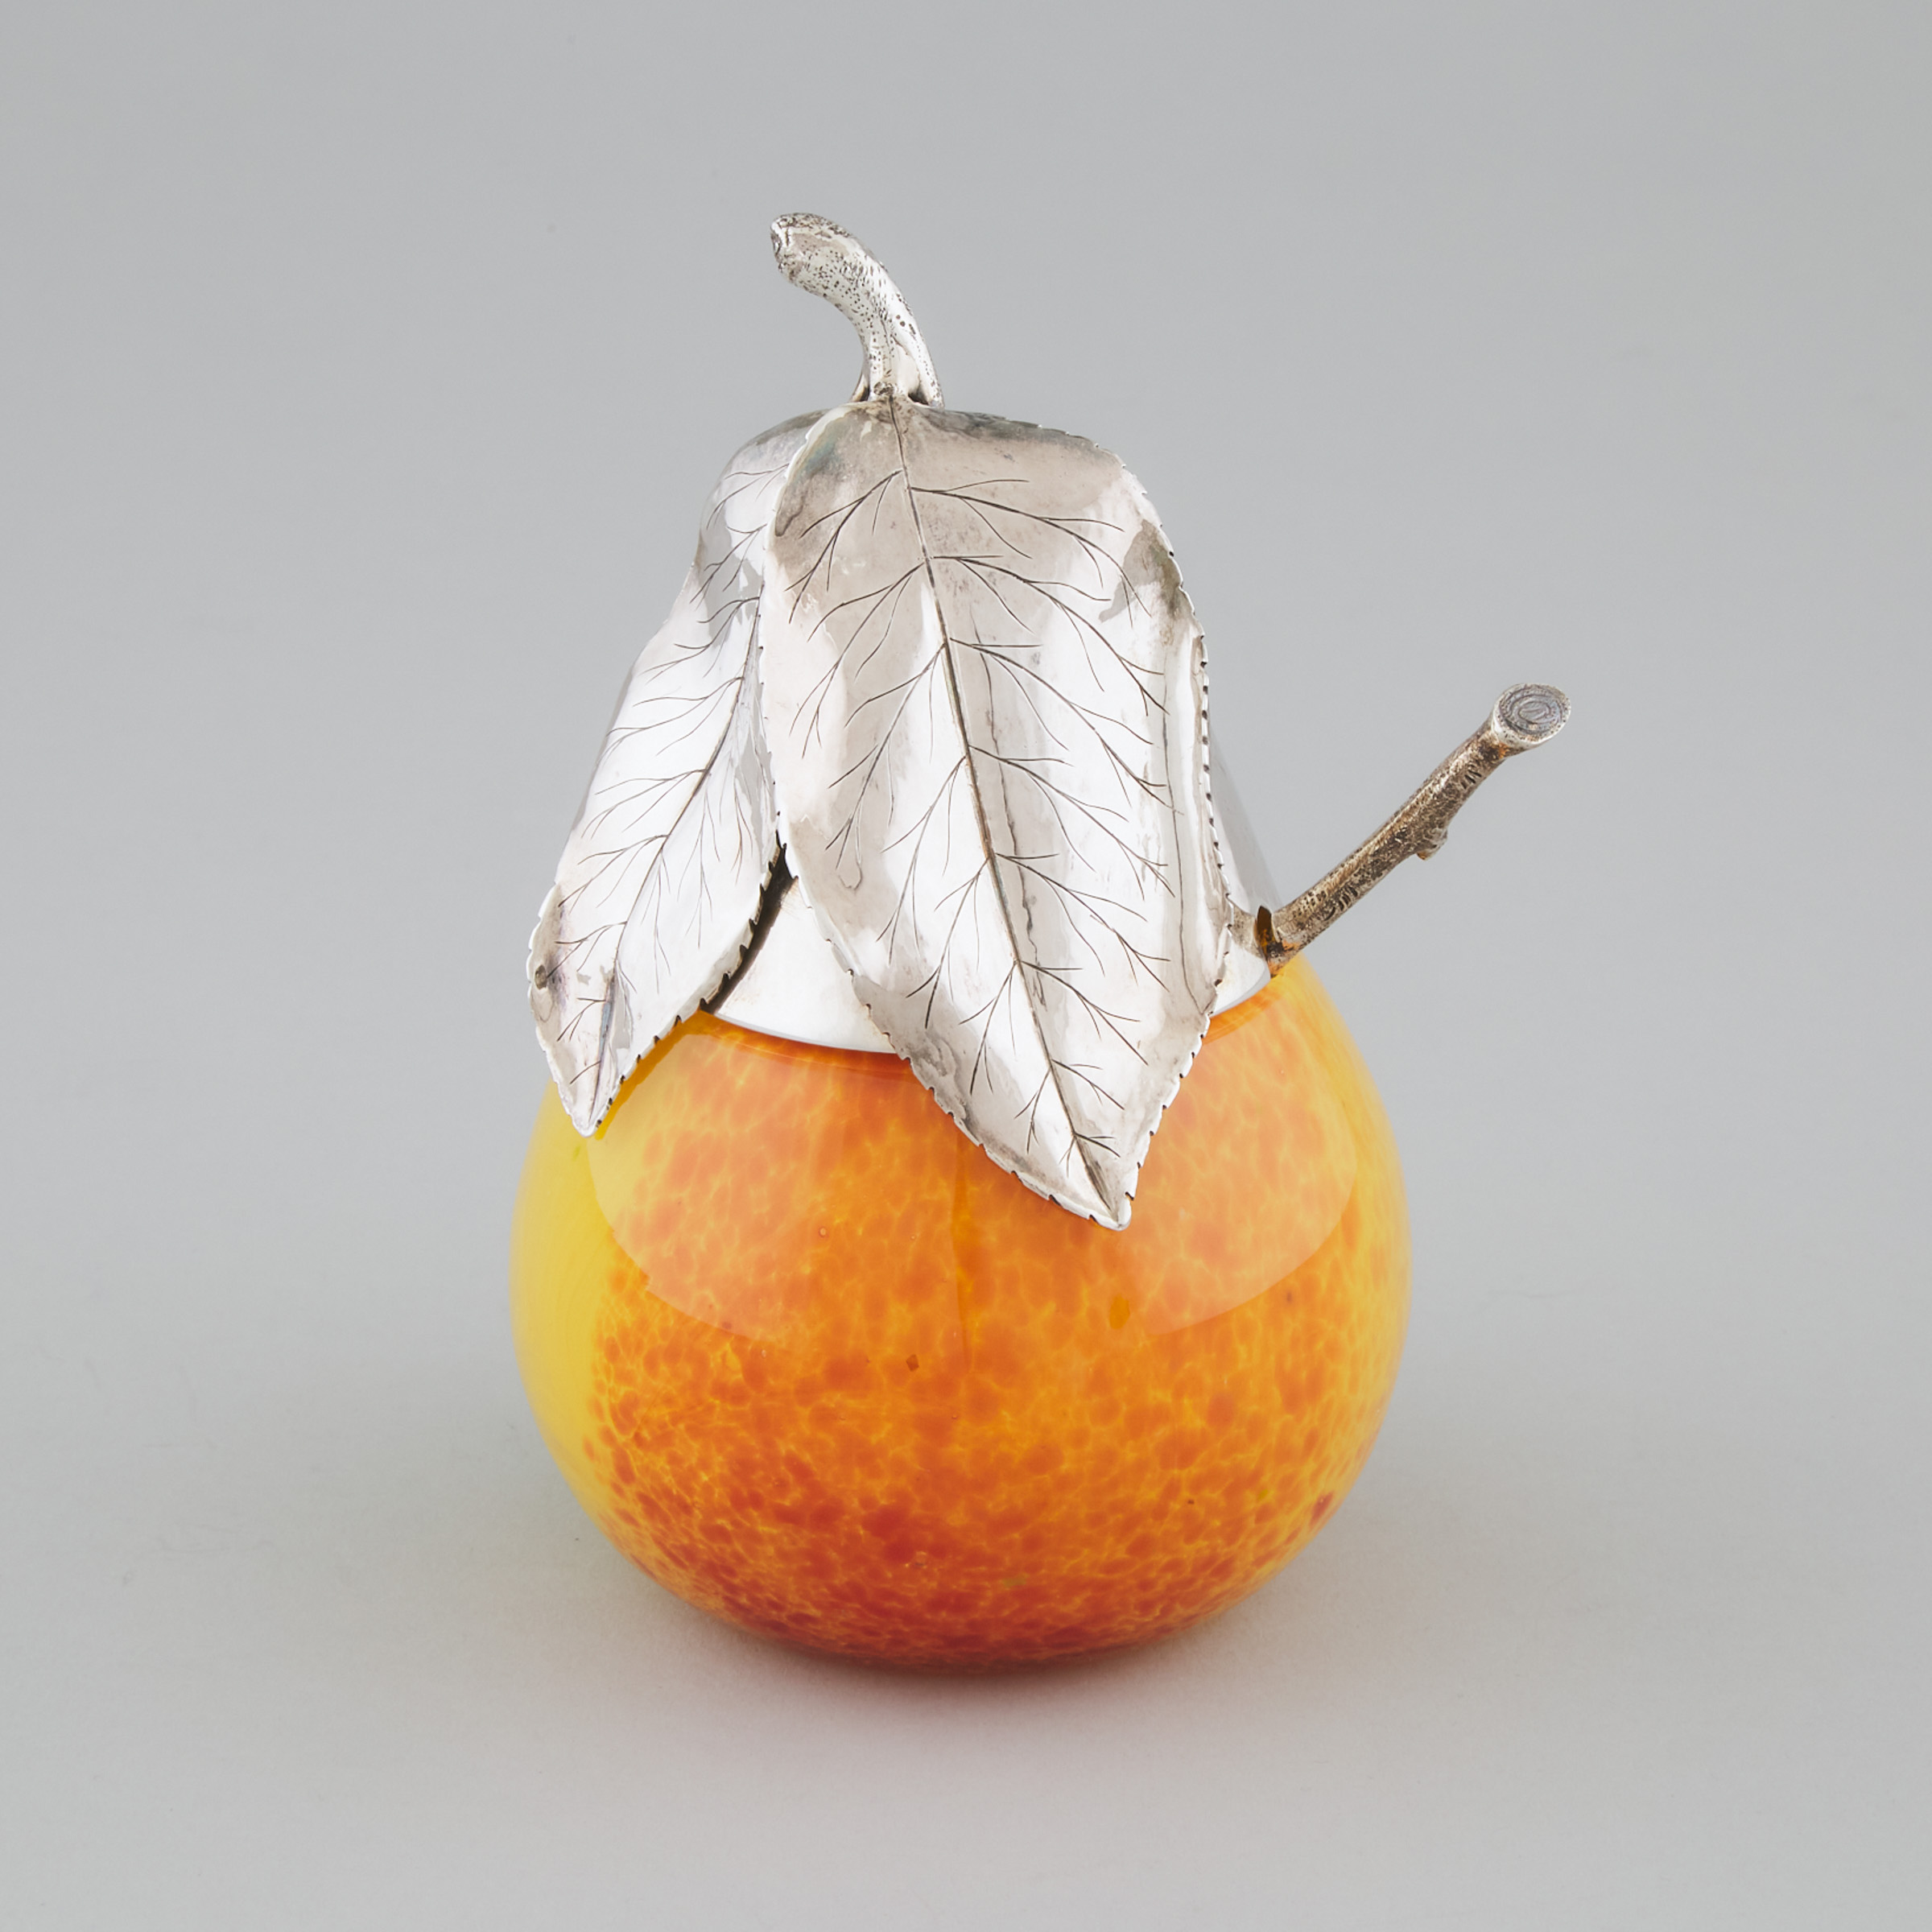 Italian Silver and Coloured Glass Pear-Form Preserve Jar with Spoon, Buccellati, Milan, 20th century